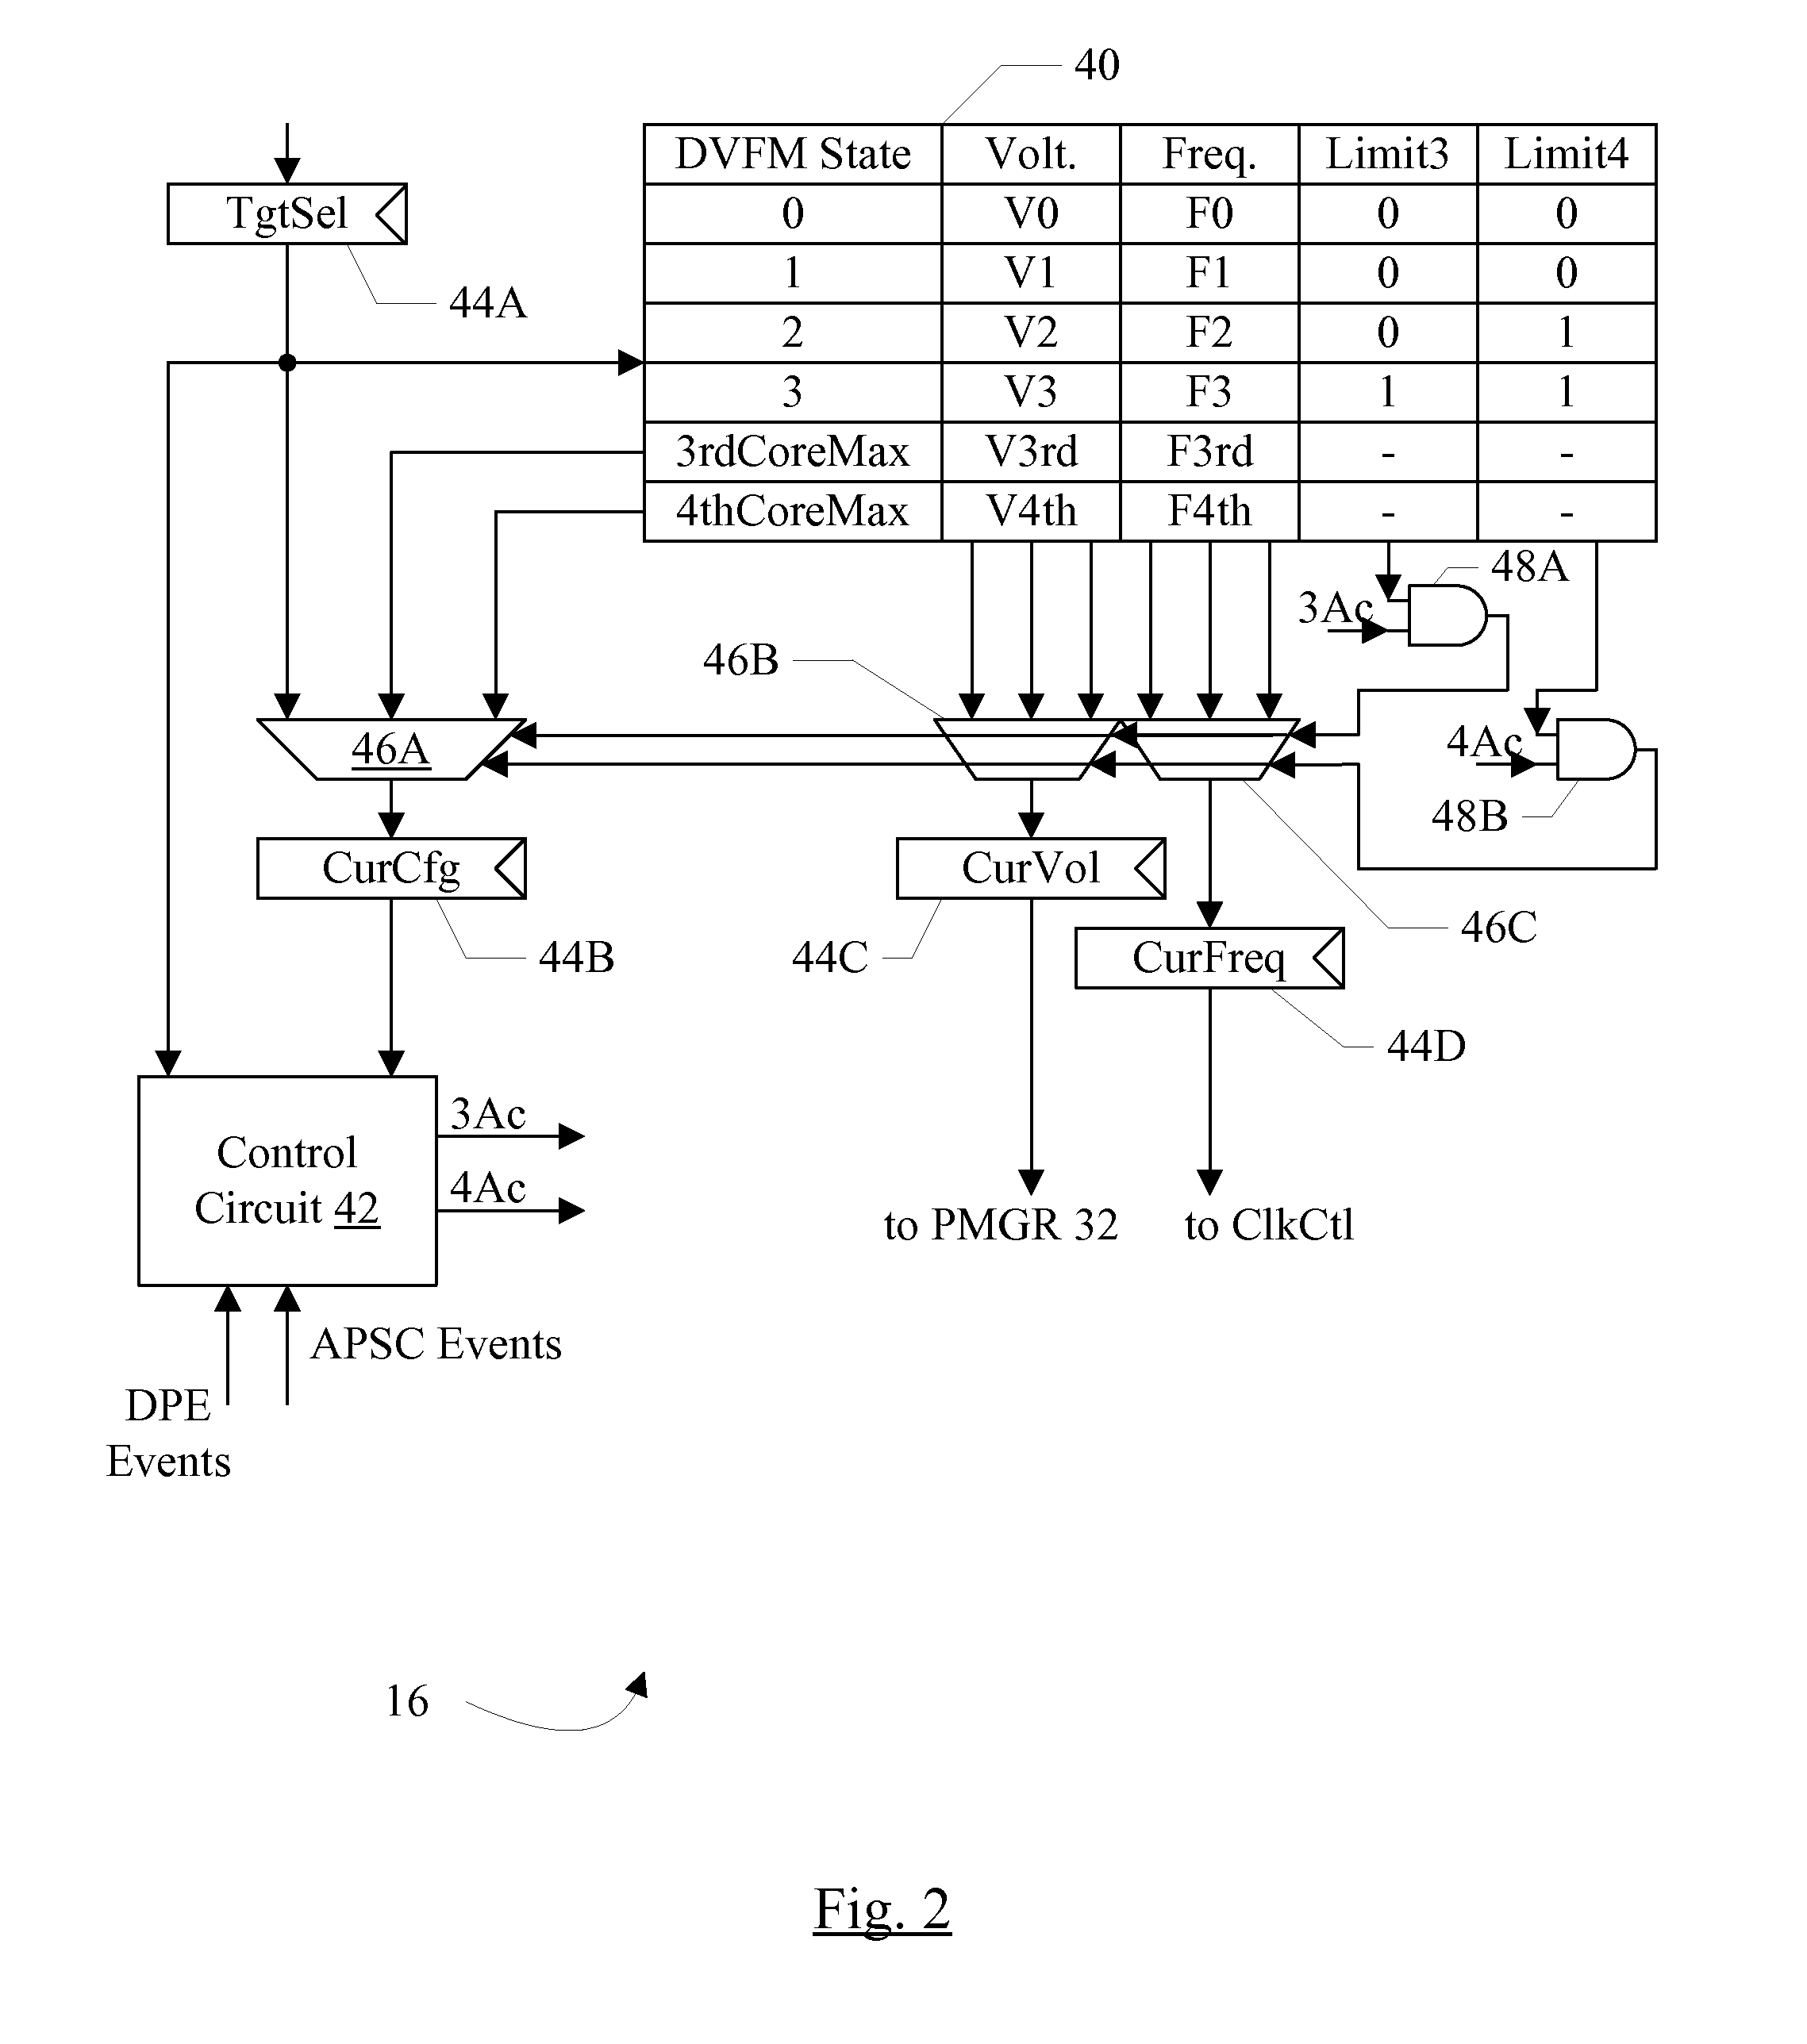 Dynamic Voltage and Frequency Management based on Active Processors